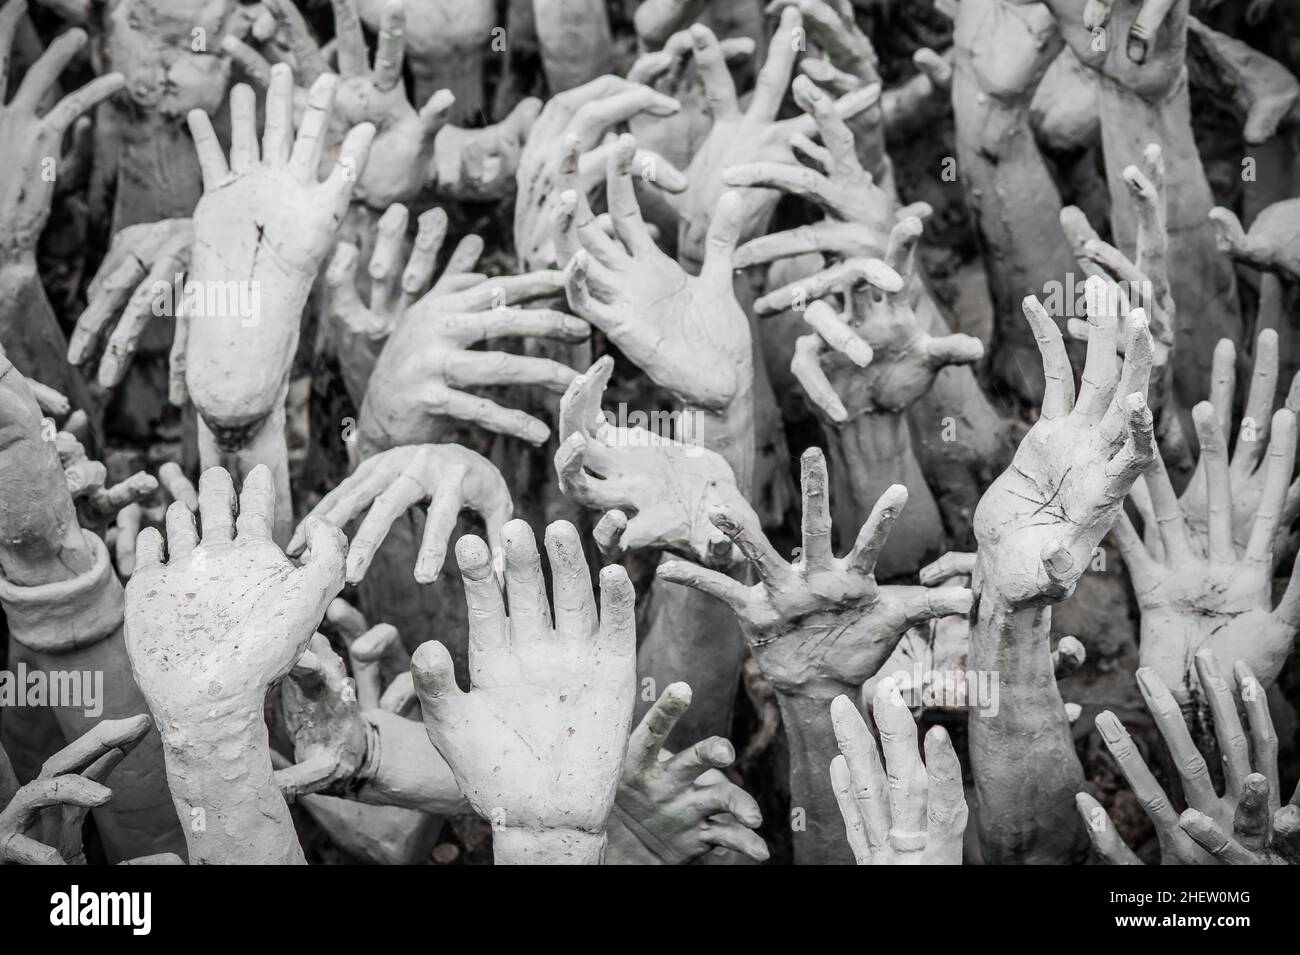 WAT RONG KHUN - WHITE TEMPLE, CHIANG RAI THAILAND - CIRCA MAY 2018. The sculpture of hundreds outreaching hands that symbolize unrestrained desire. Stock Photo